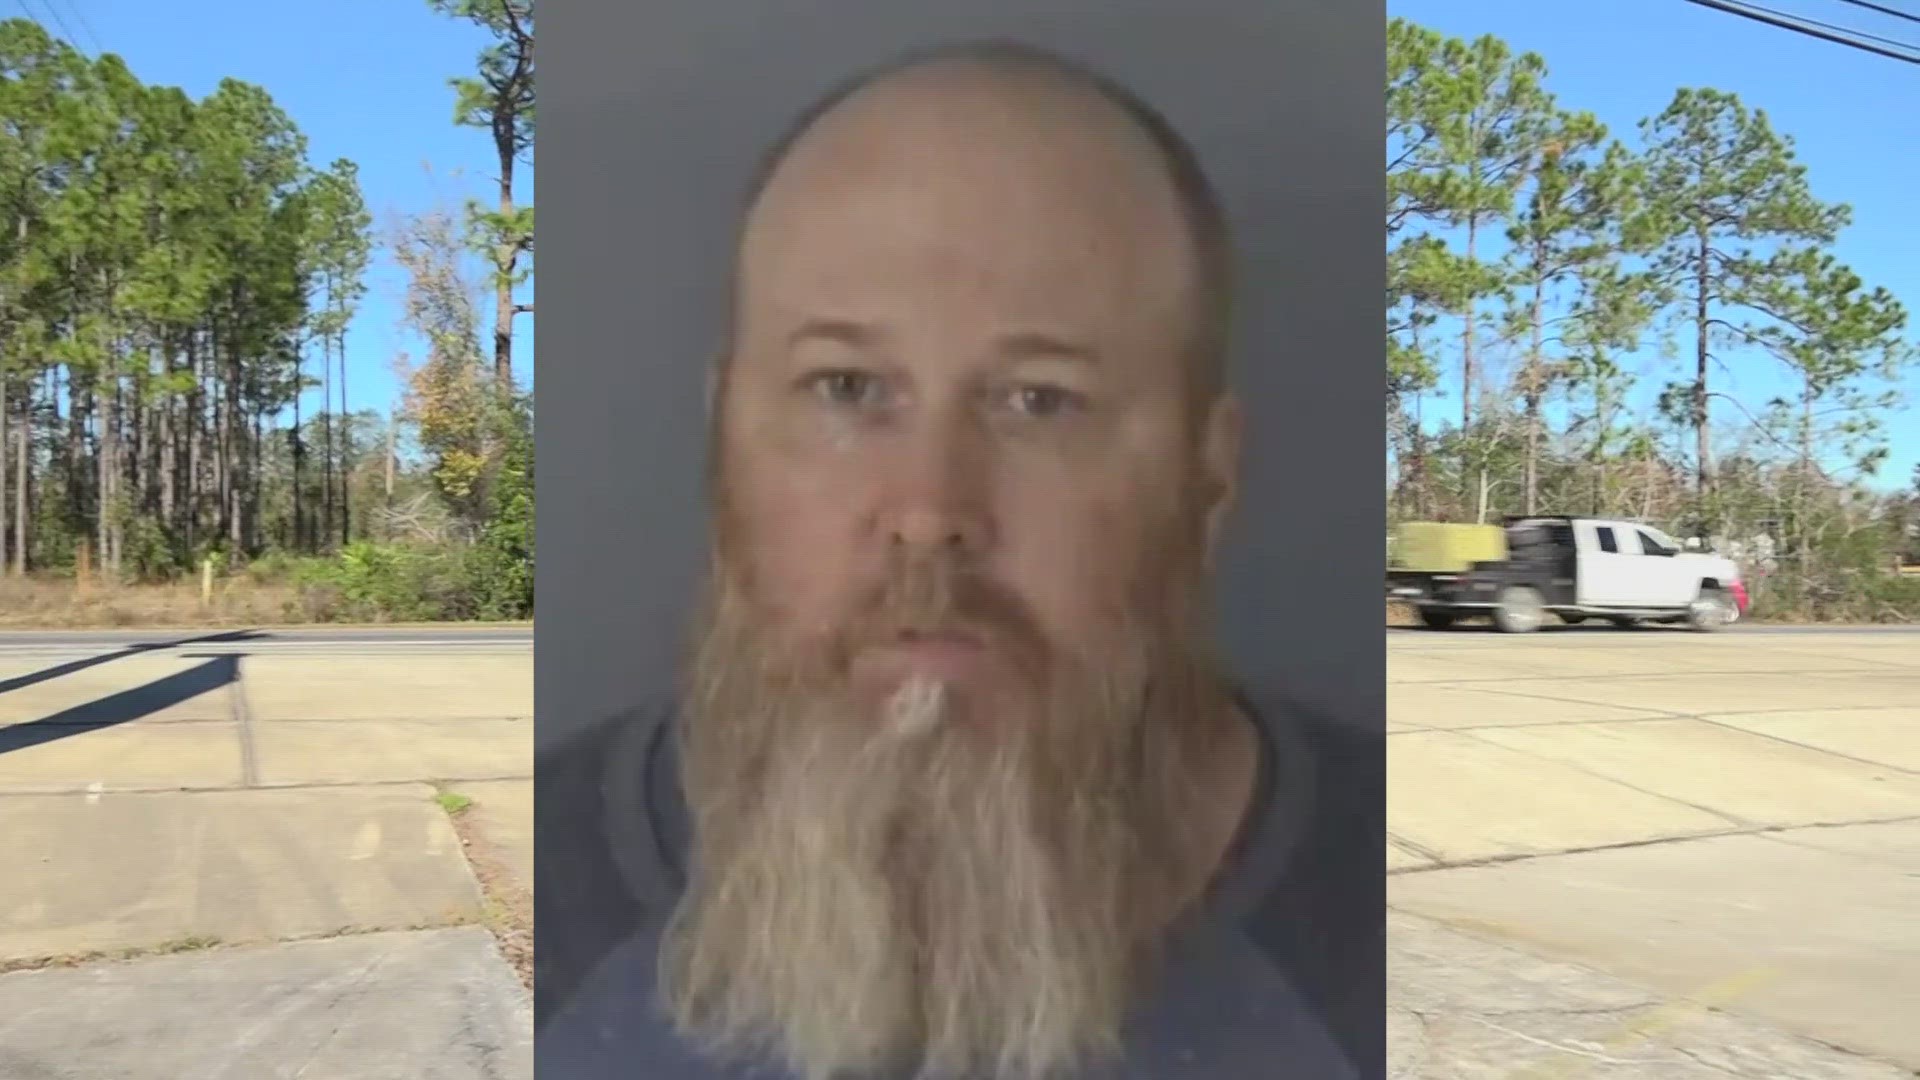 Douglas Moore, 43, was charged with six counts of aggravated assault after he was "agitated" with parade, the Clay County Sheriff's Office said.